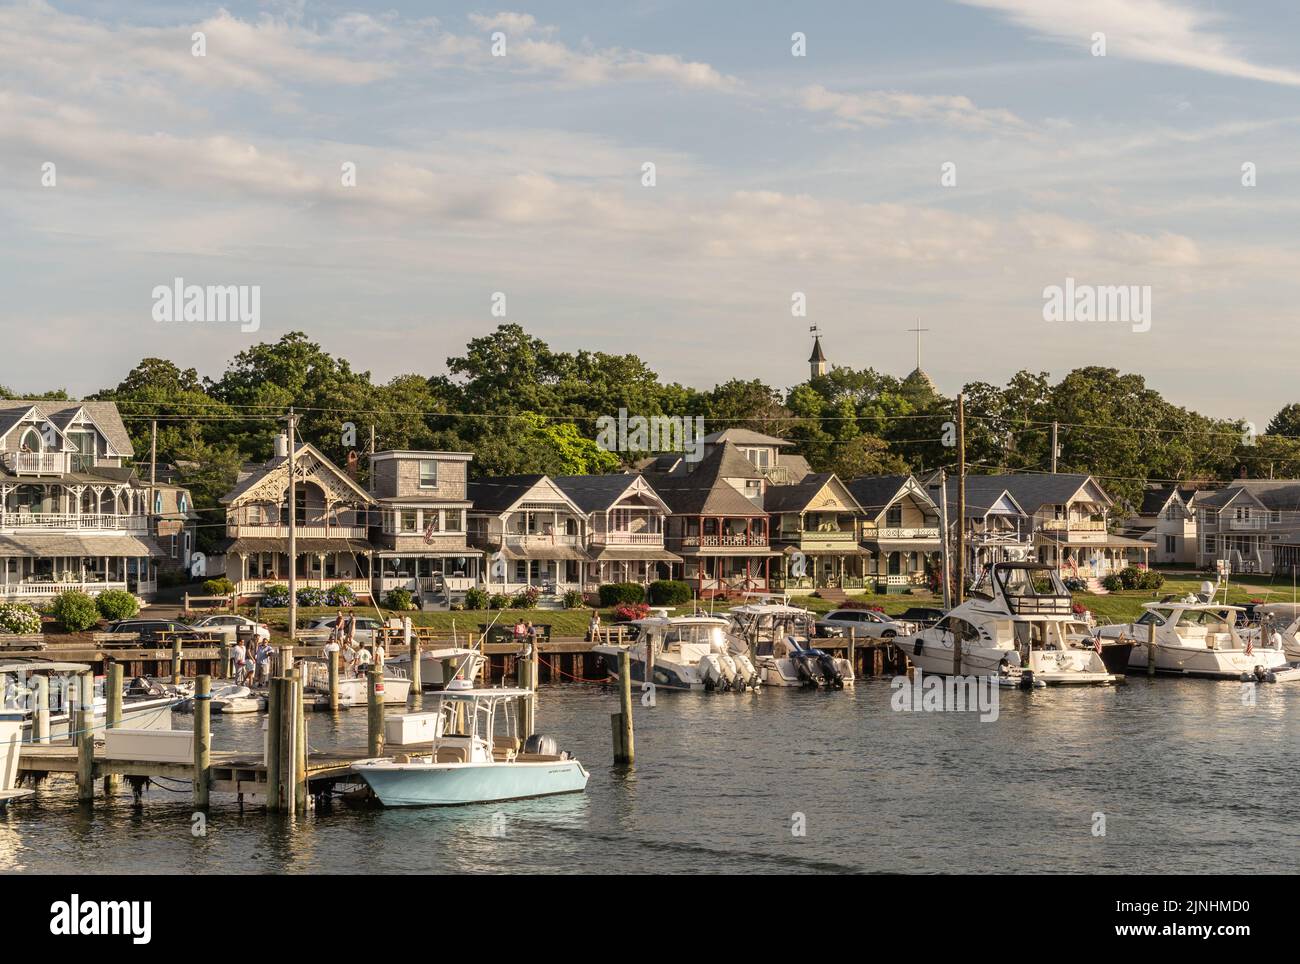 Oaks Bluff, Martha’s Vineyard, Cape Cod, Massachusetts, July 8, 2022:  Row of charming Carpenter Gothic Cottages overlooking the harbor of Oaks Bluff Stock Photo